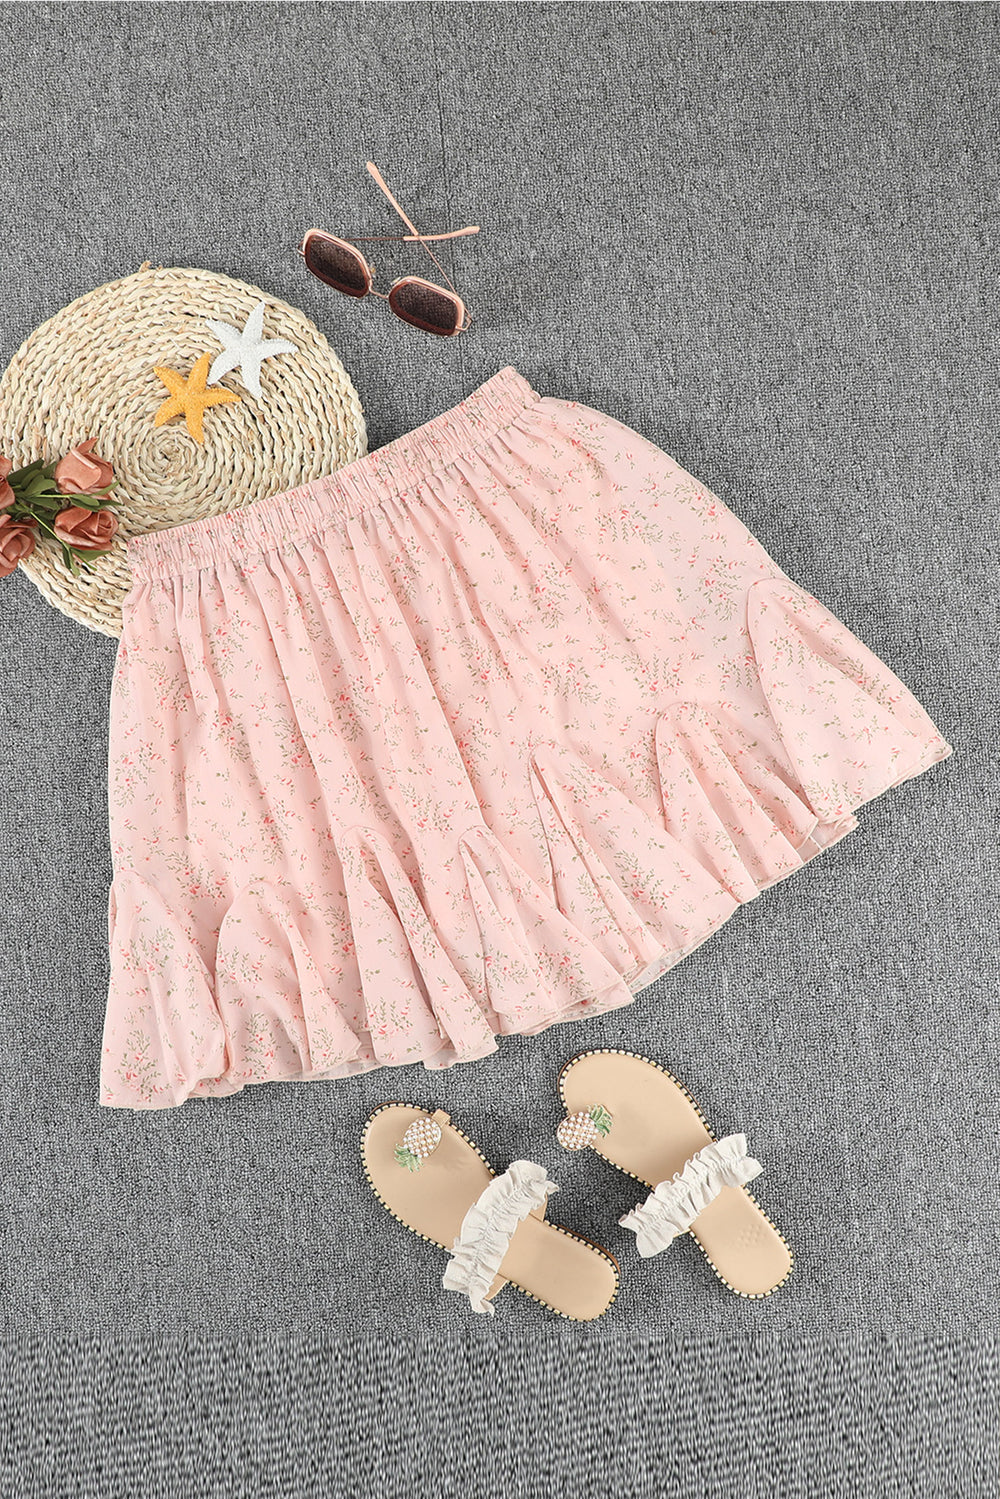 Summer Apricot Ruffled Floral Mini Skirt, Shop for cheap Summer Apricot Ruffled Floral Mini Skirt online? Buy at Modeshe.com on sale!